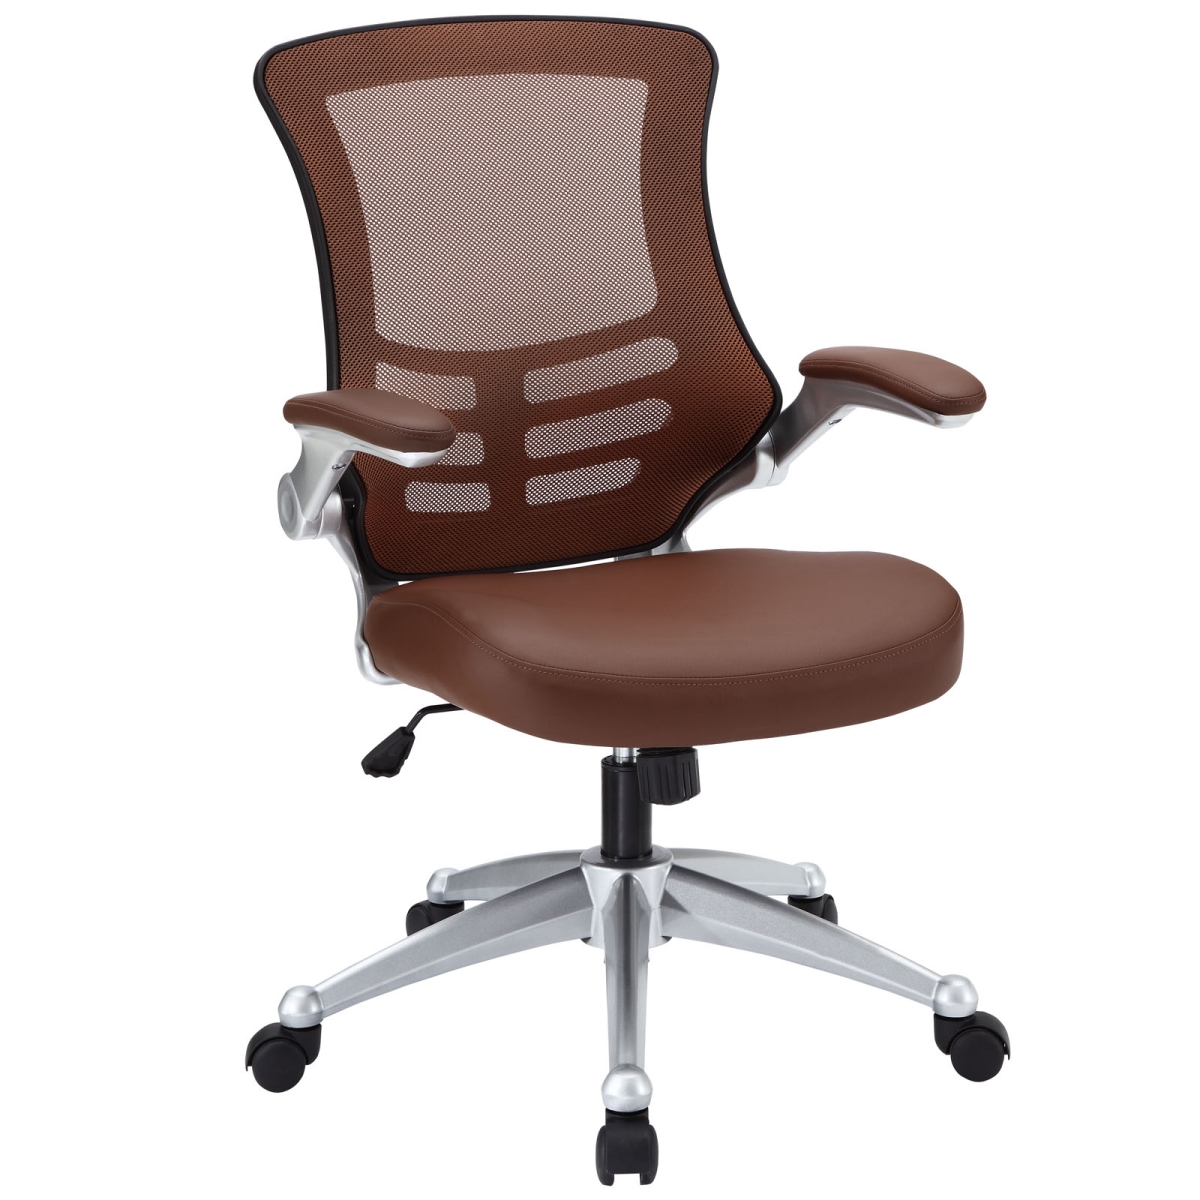 Modway Eei-210-tan 40.5 - 43.5 H X 26.5 W X 25 L In. Attainment Office Chair In Tan Mesh & Leatherette, Tan